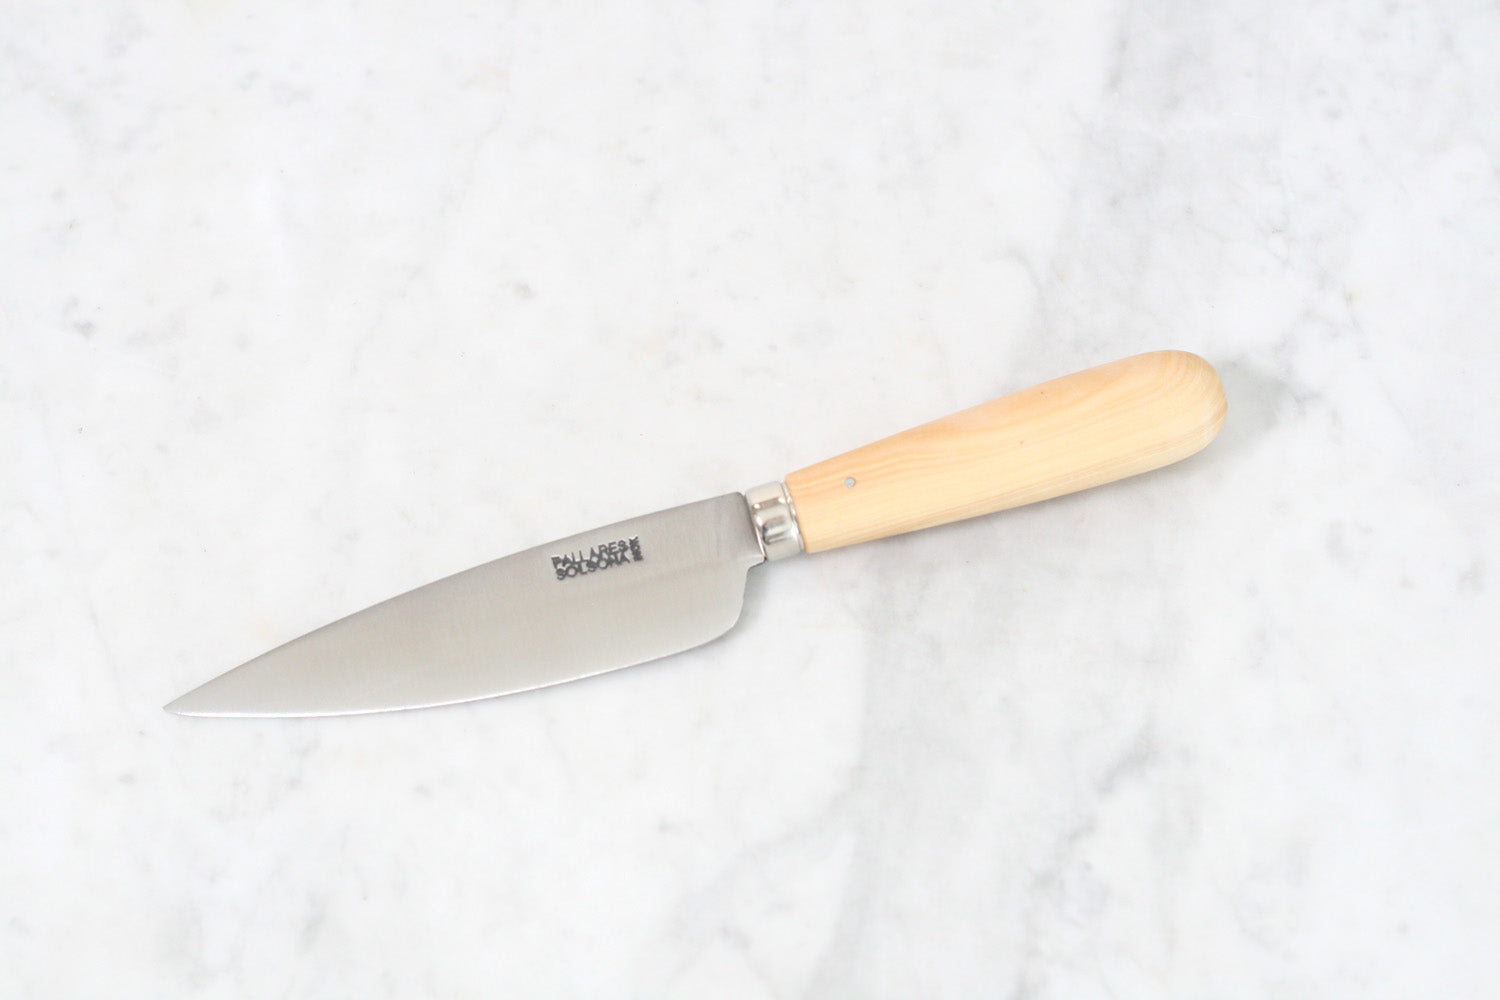 Pallarès Solsona Utility Knife, Stainless